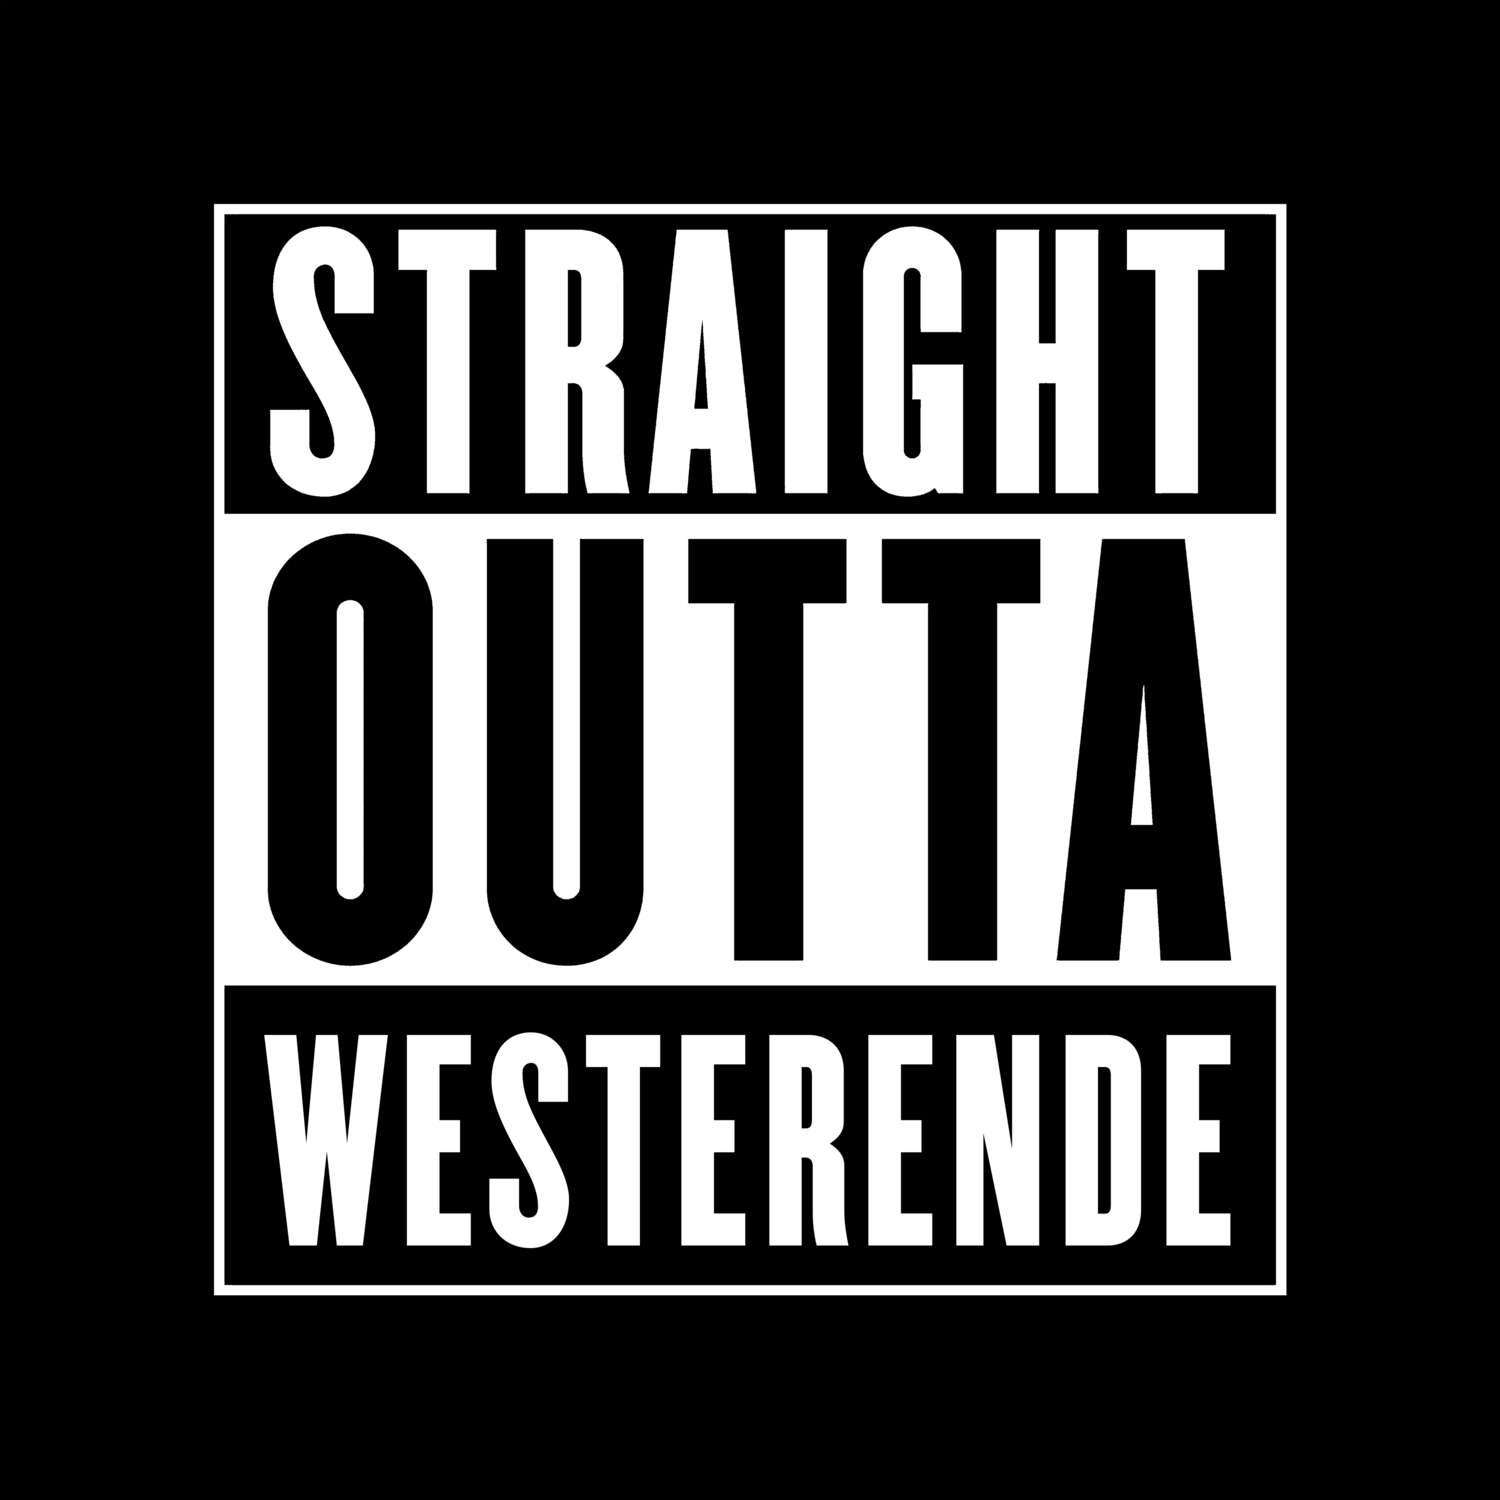 Westerende T-Shirt »Straight Outta«